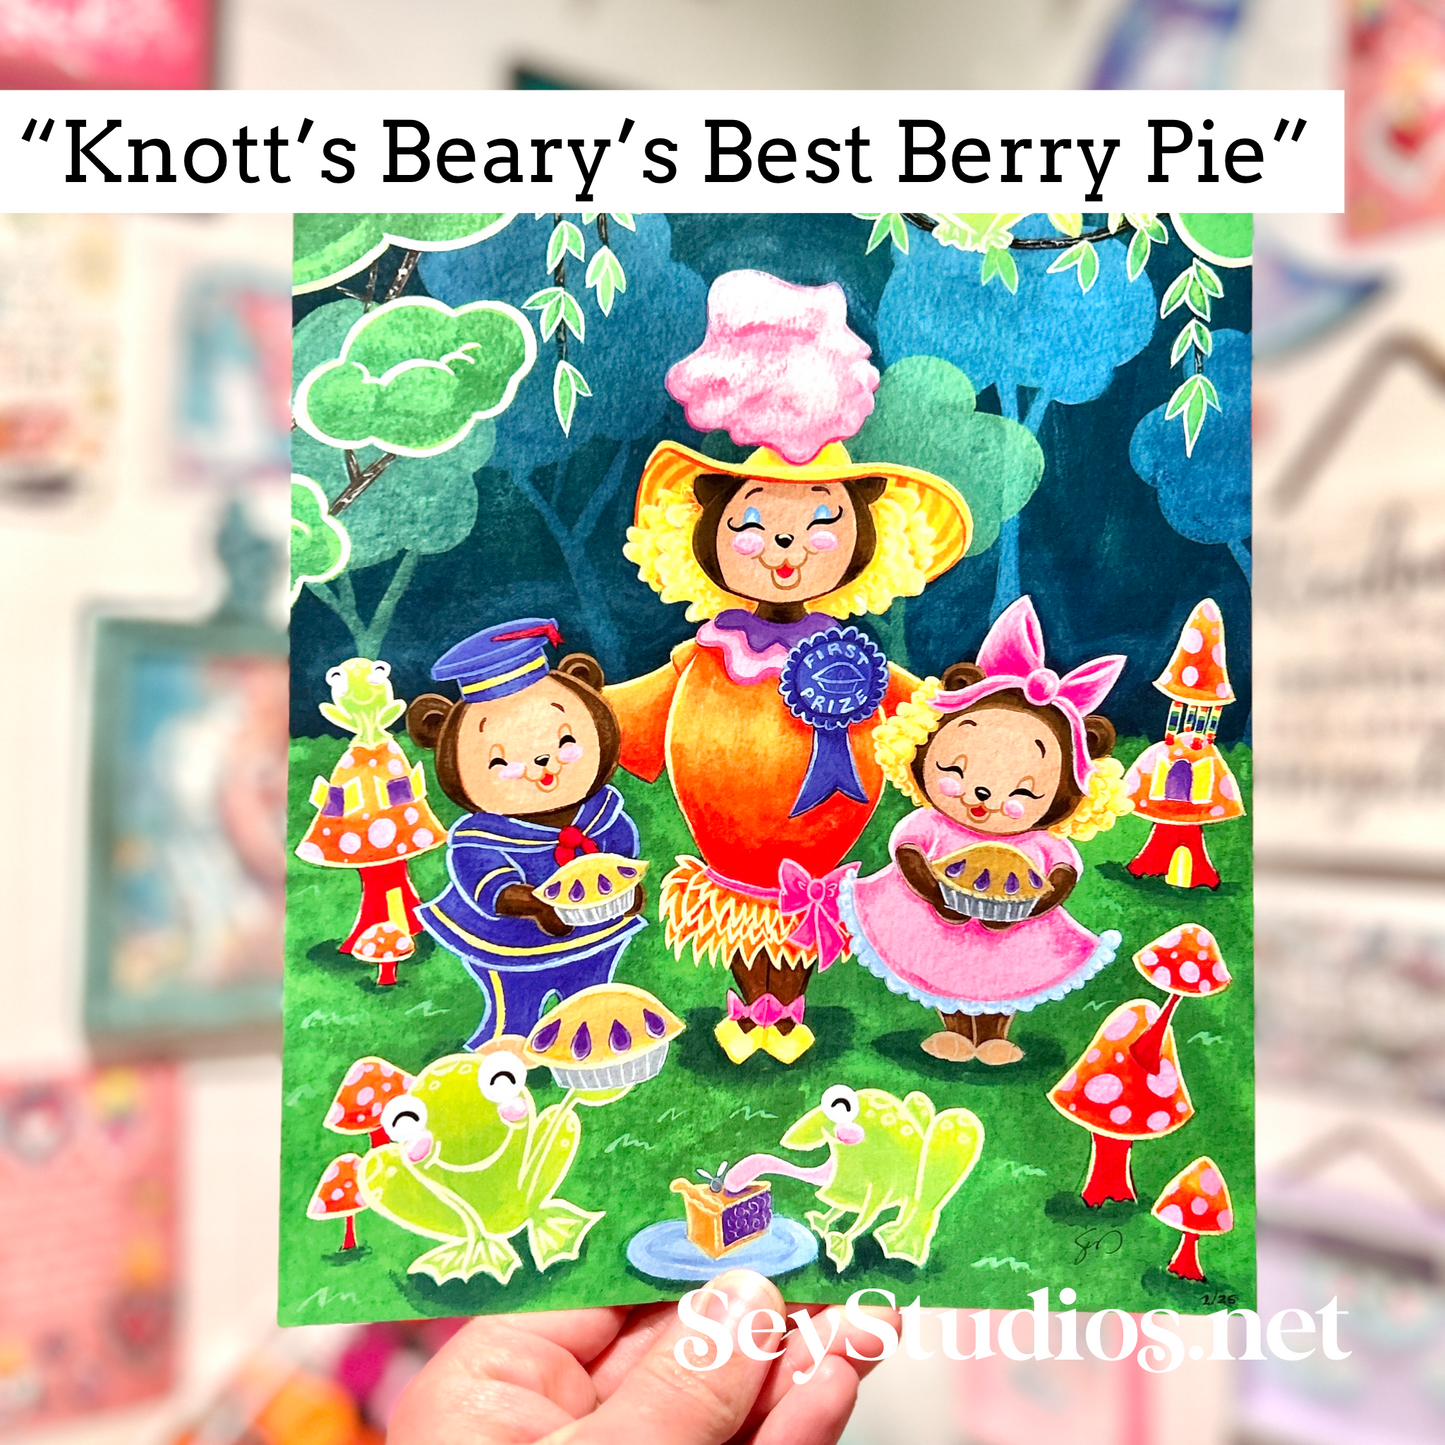 “Knott’s Beary’s Best Berry Pie” Limited Edition Signed Print